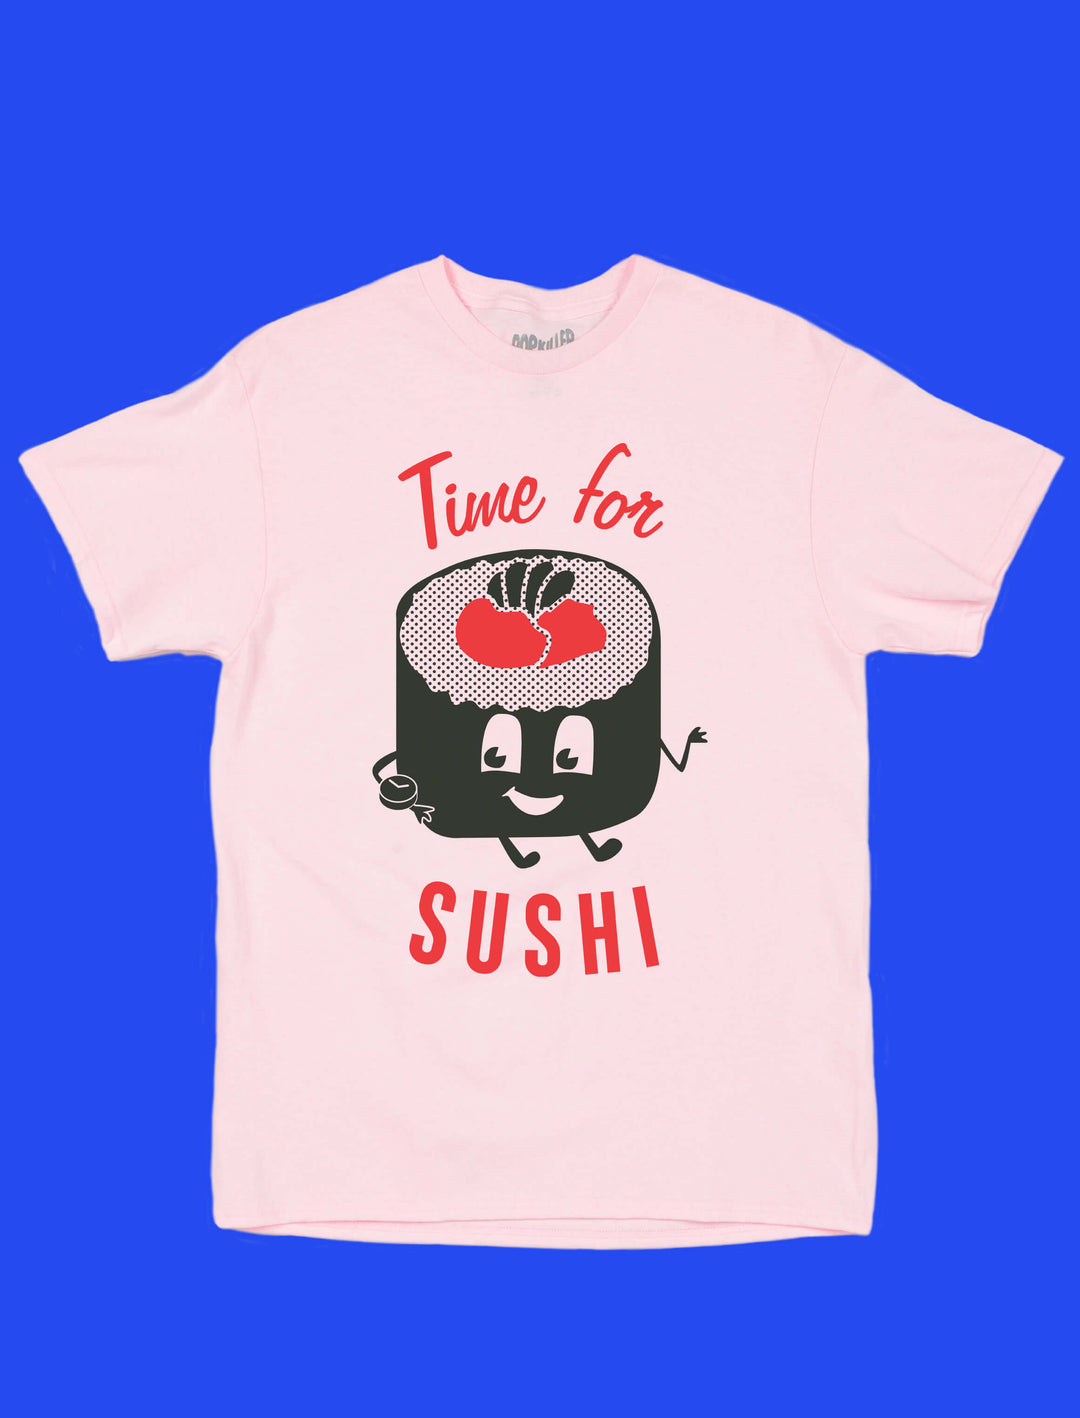 Time for sushi pink graphic t-shirt.